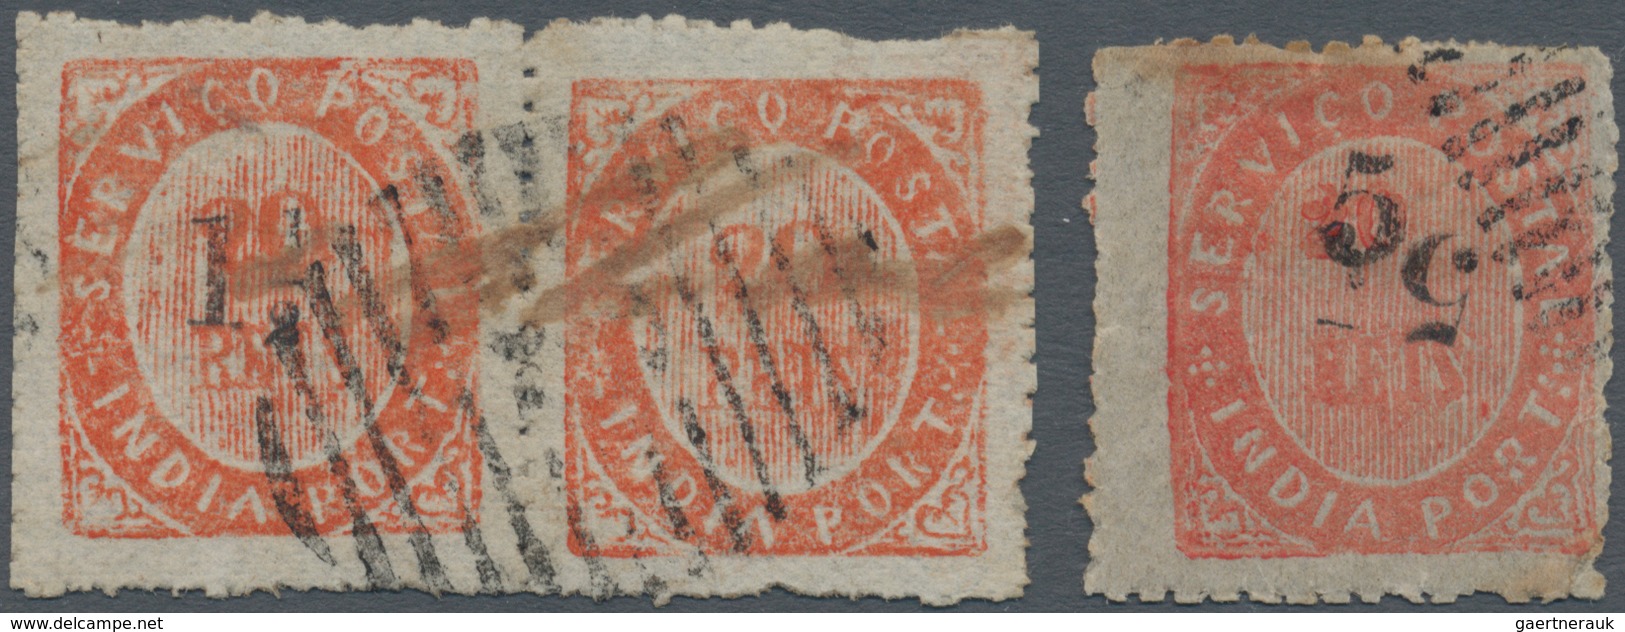 00448 Portugiesisch-Indien: 1881, Types/tipos;1 1/2 R.on 20 R. (MF 63) Used: IA, A Horizontal Pair With Po - Portuguese India